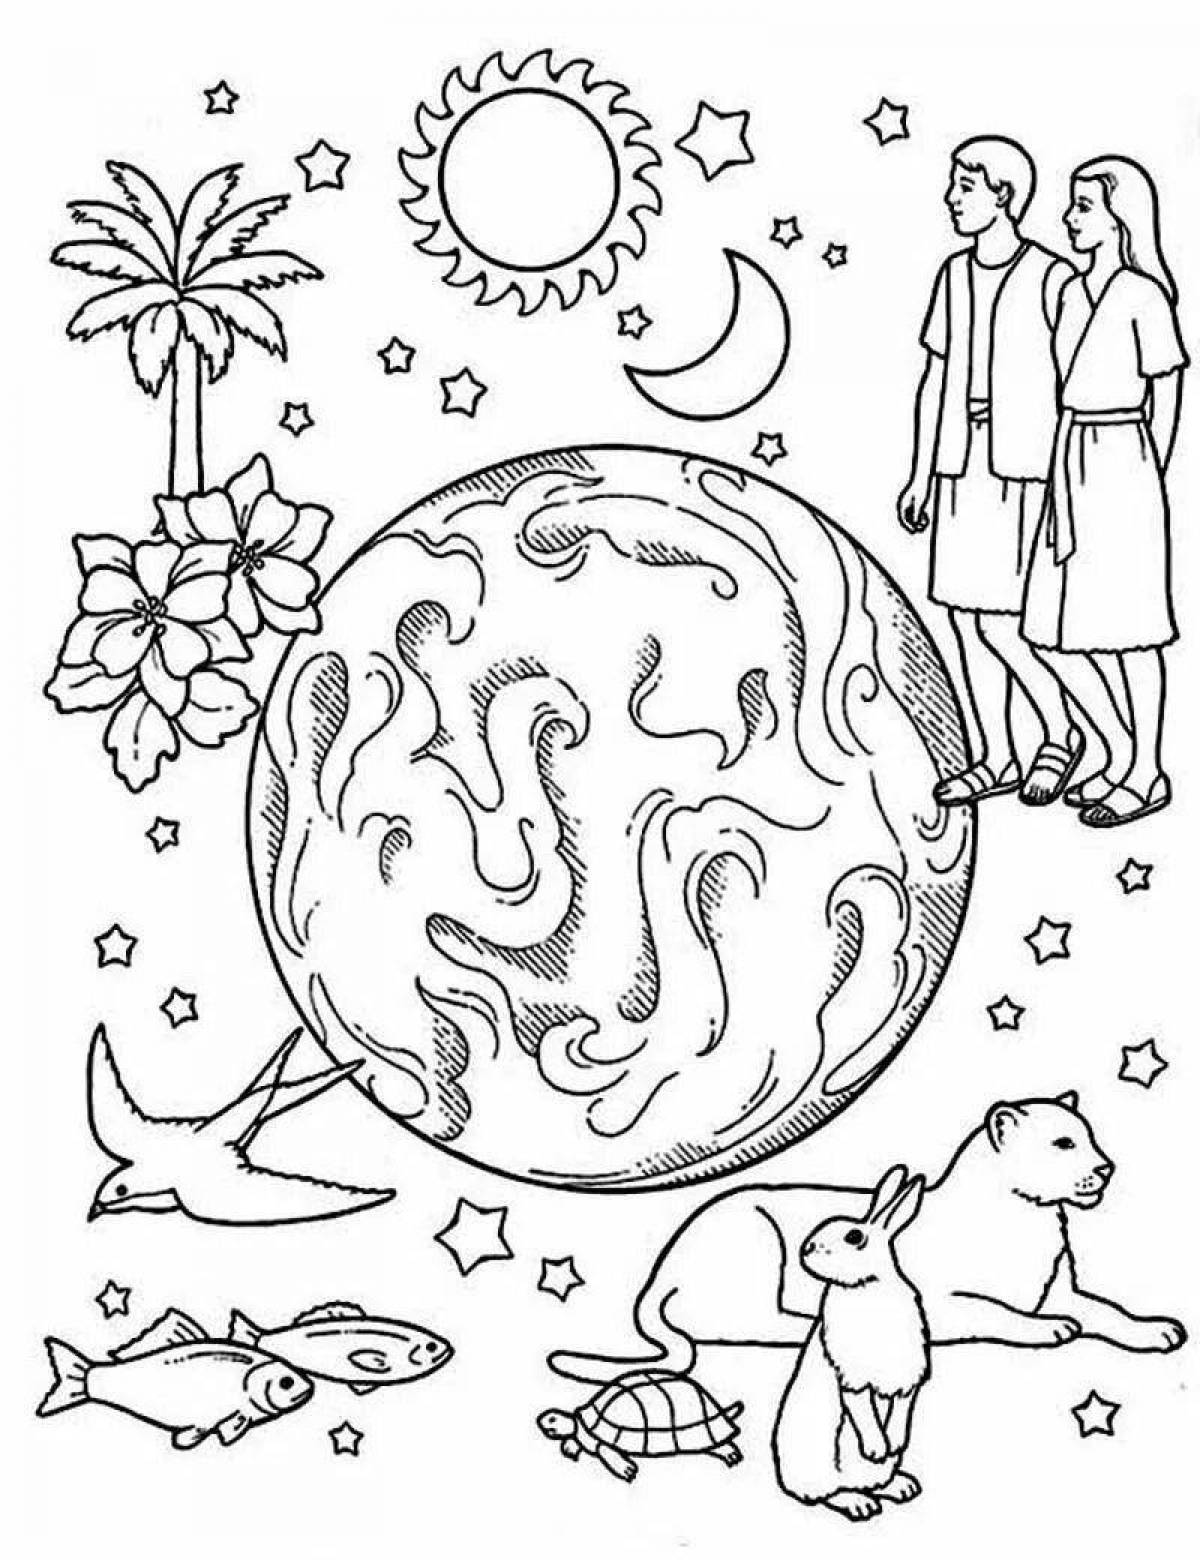 Coloring page peace of mind on earth